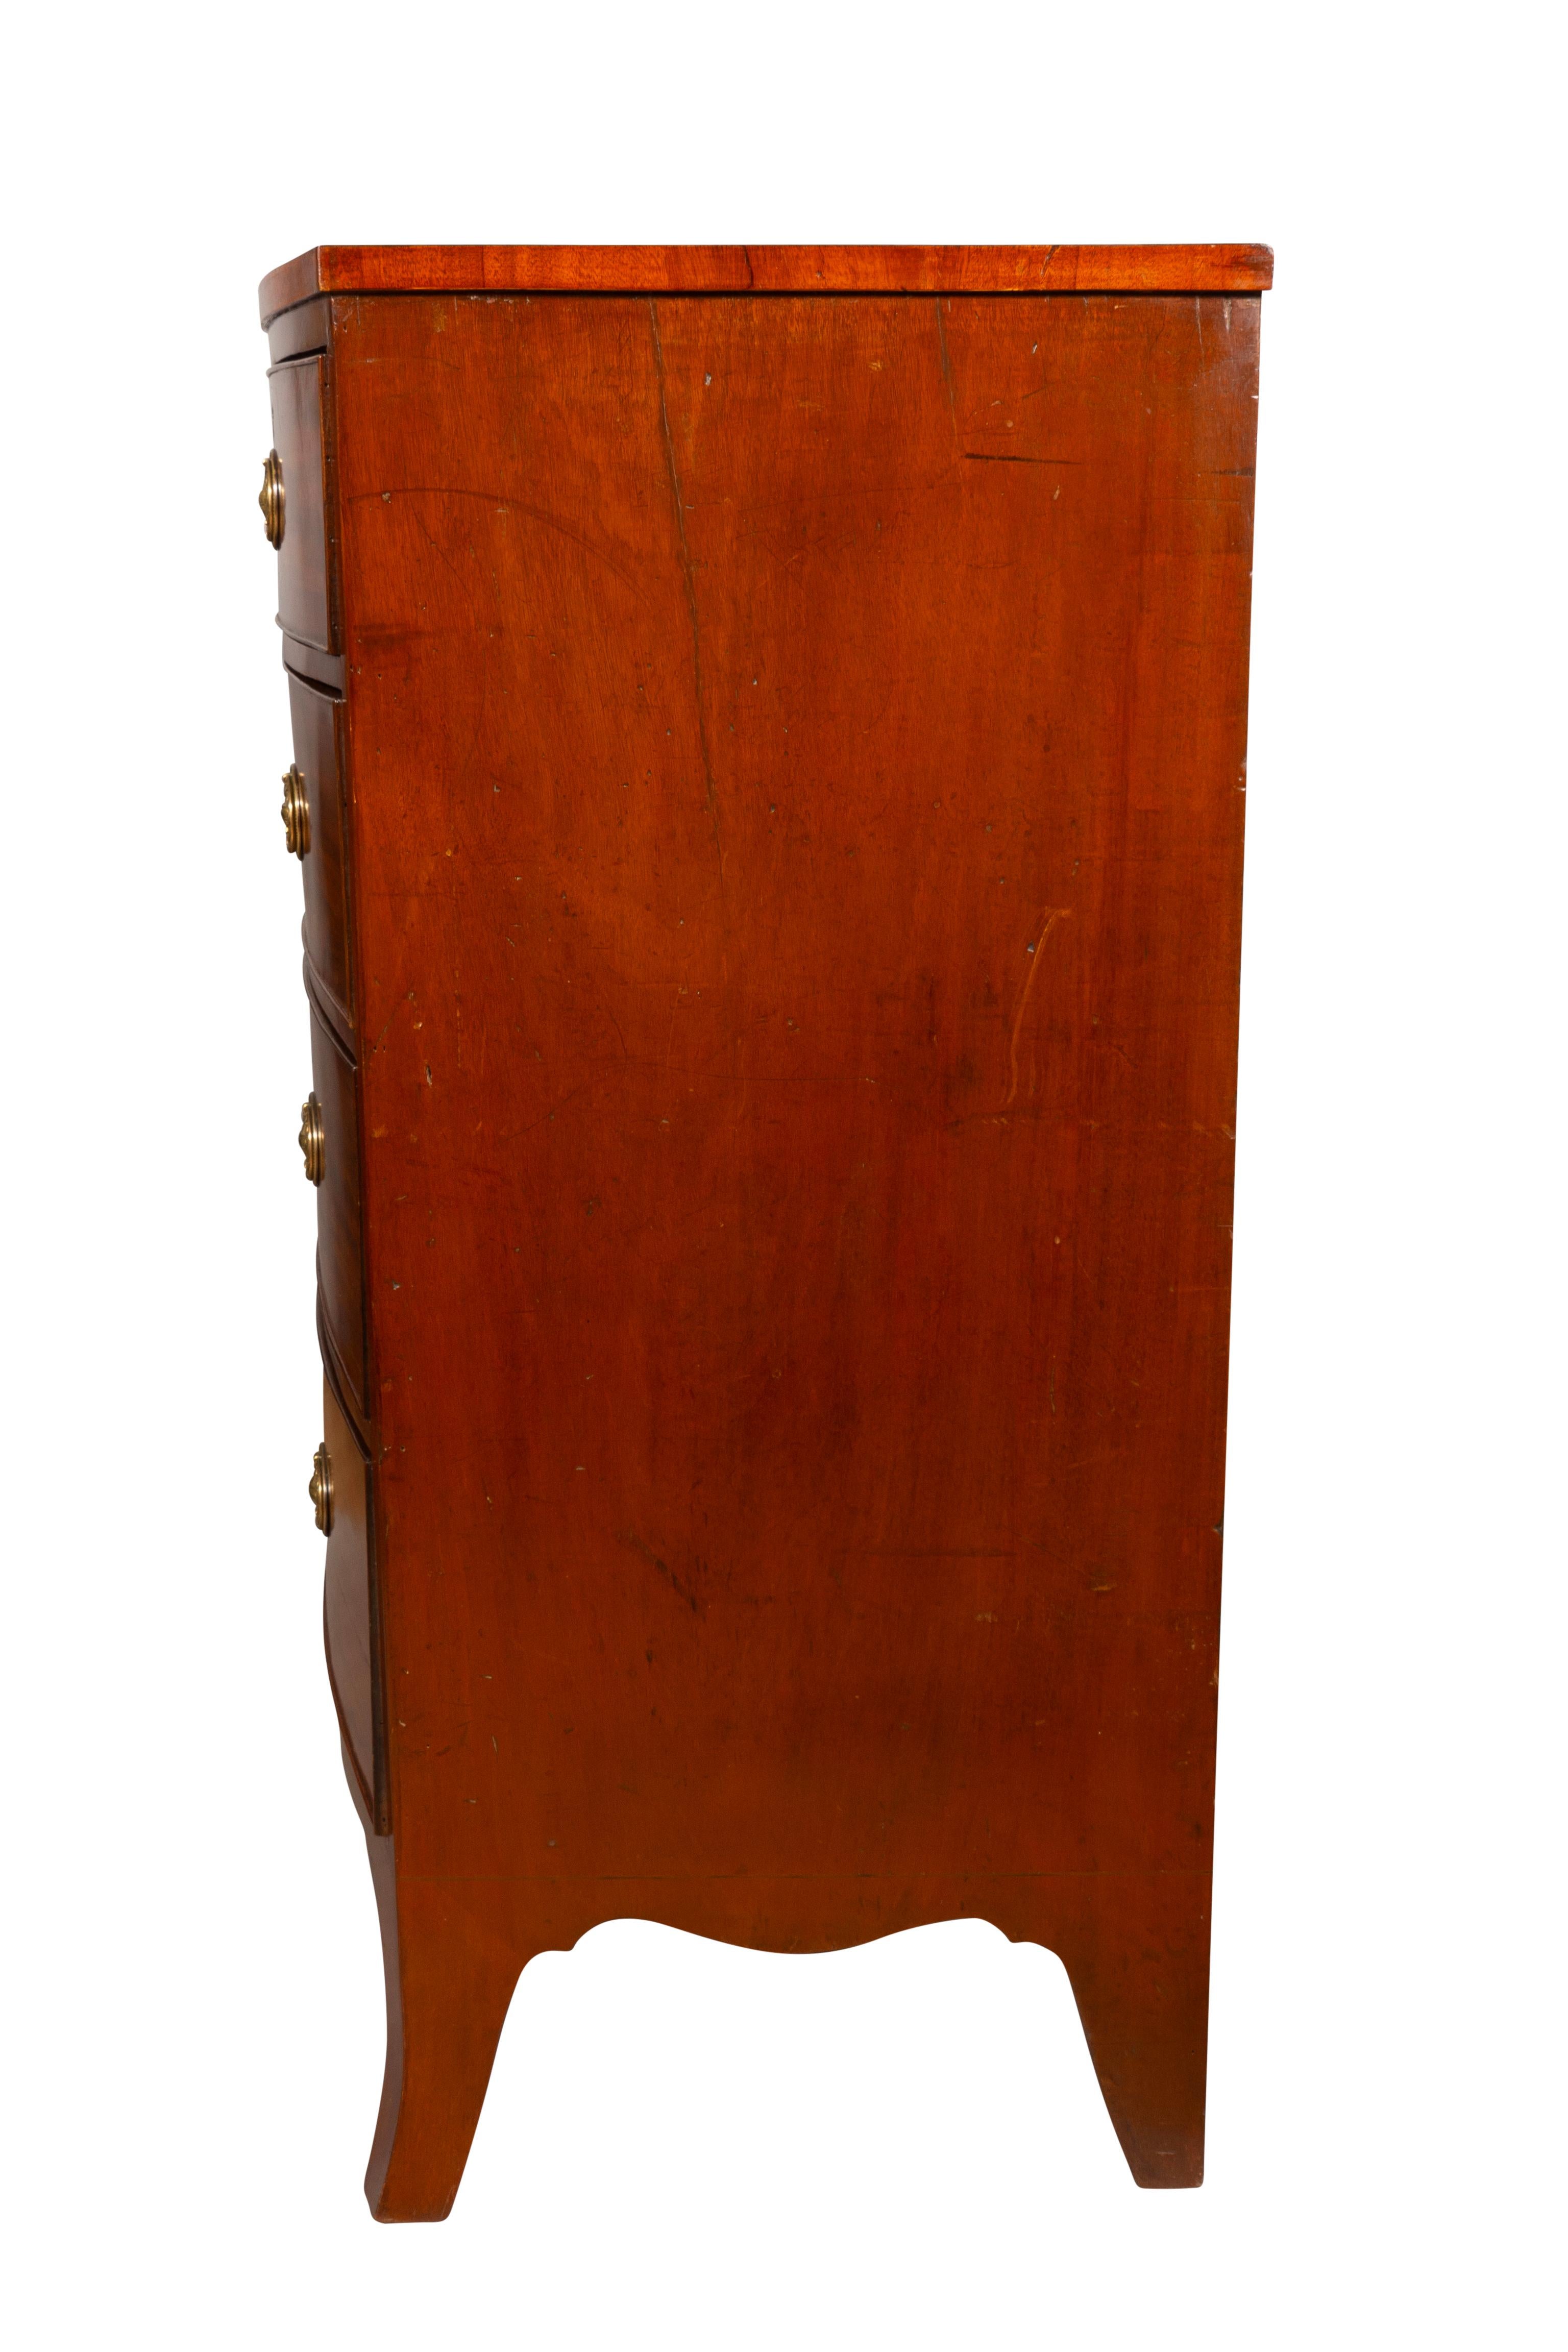 19th Century Regency Mahogany Bow front Chest Of Drawers For Sale